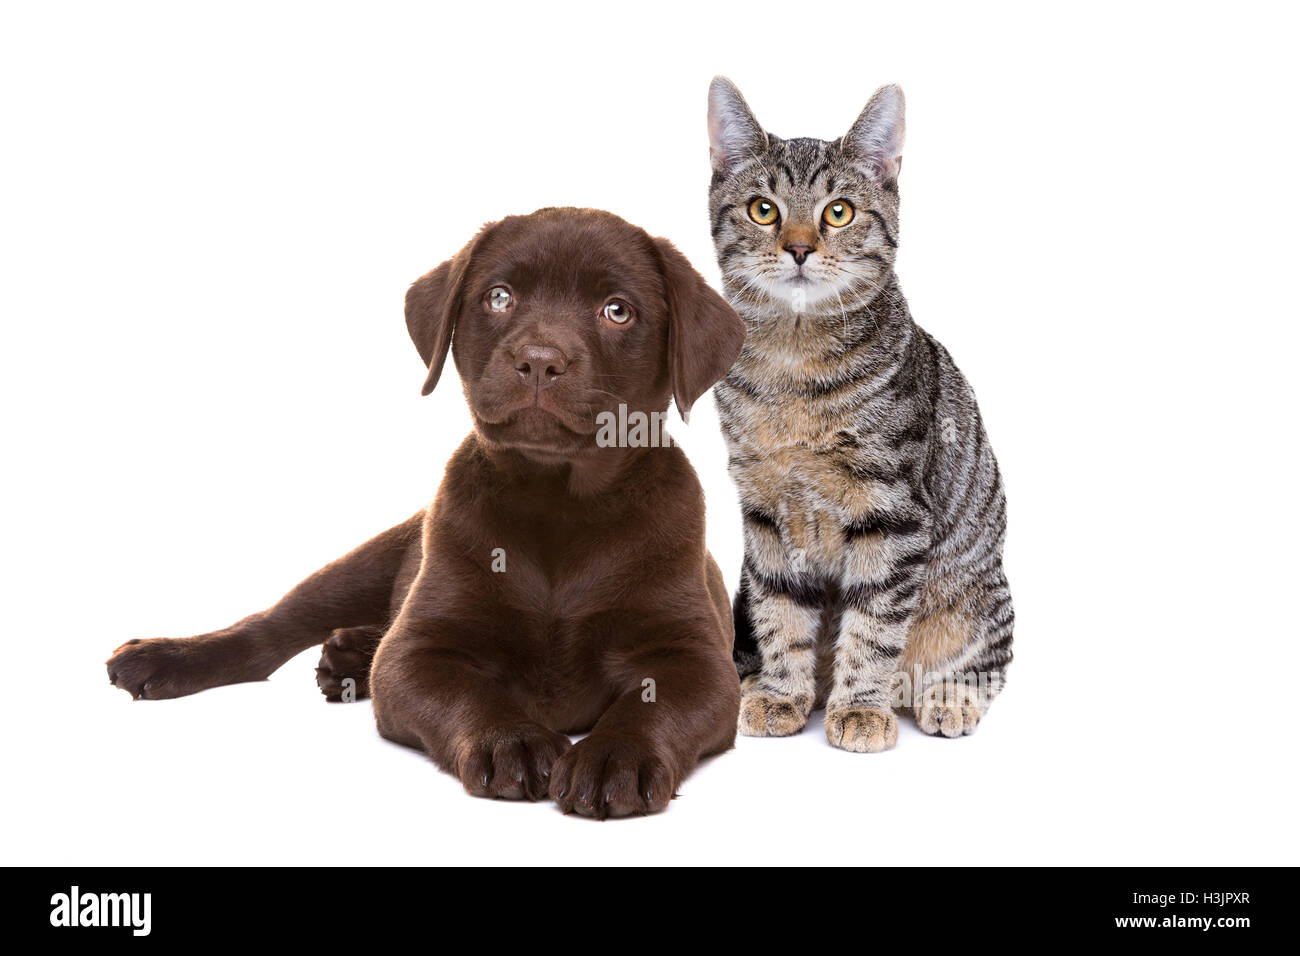 Chocolate Labrador puppy and an european short haired cat in front of a white background Stock Photo